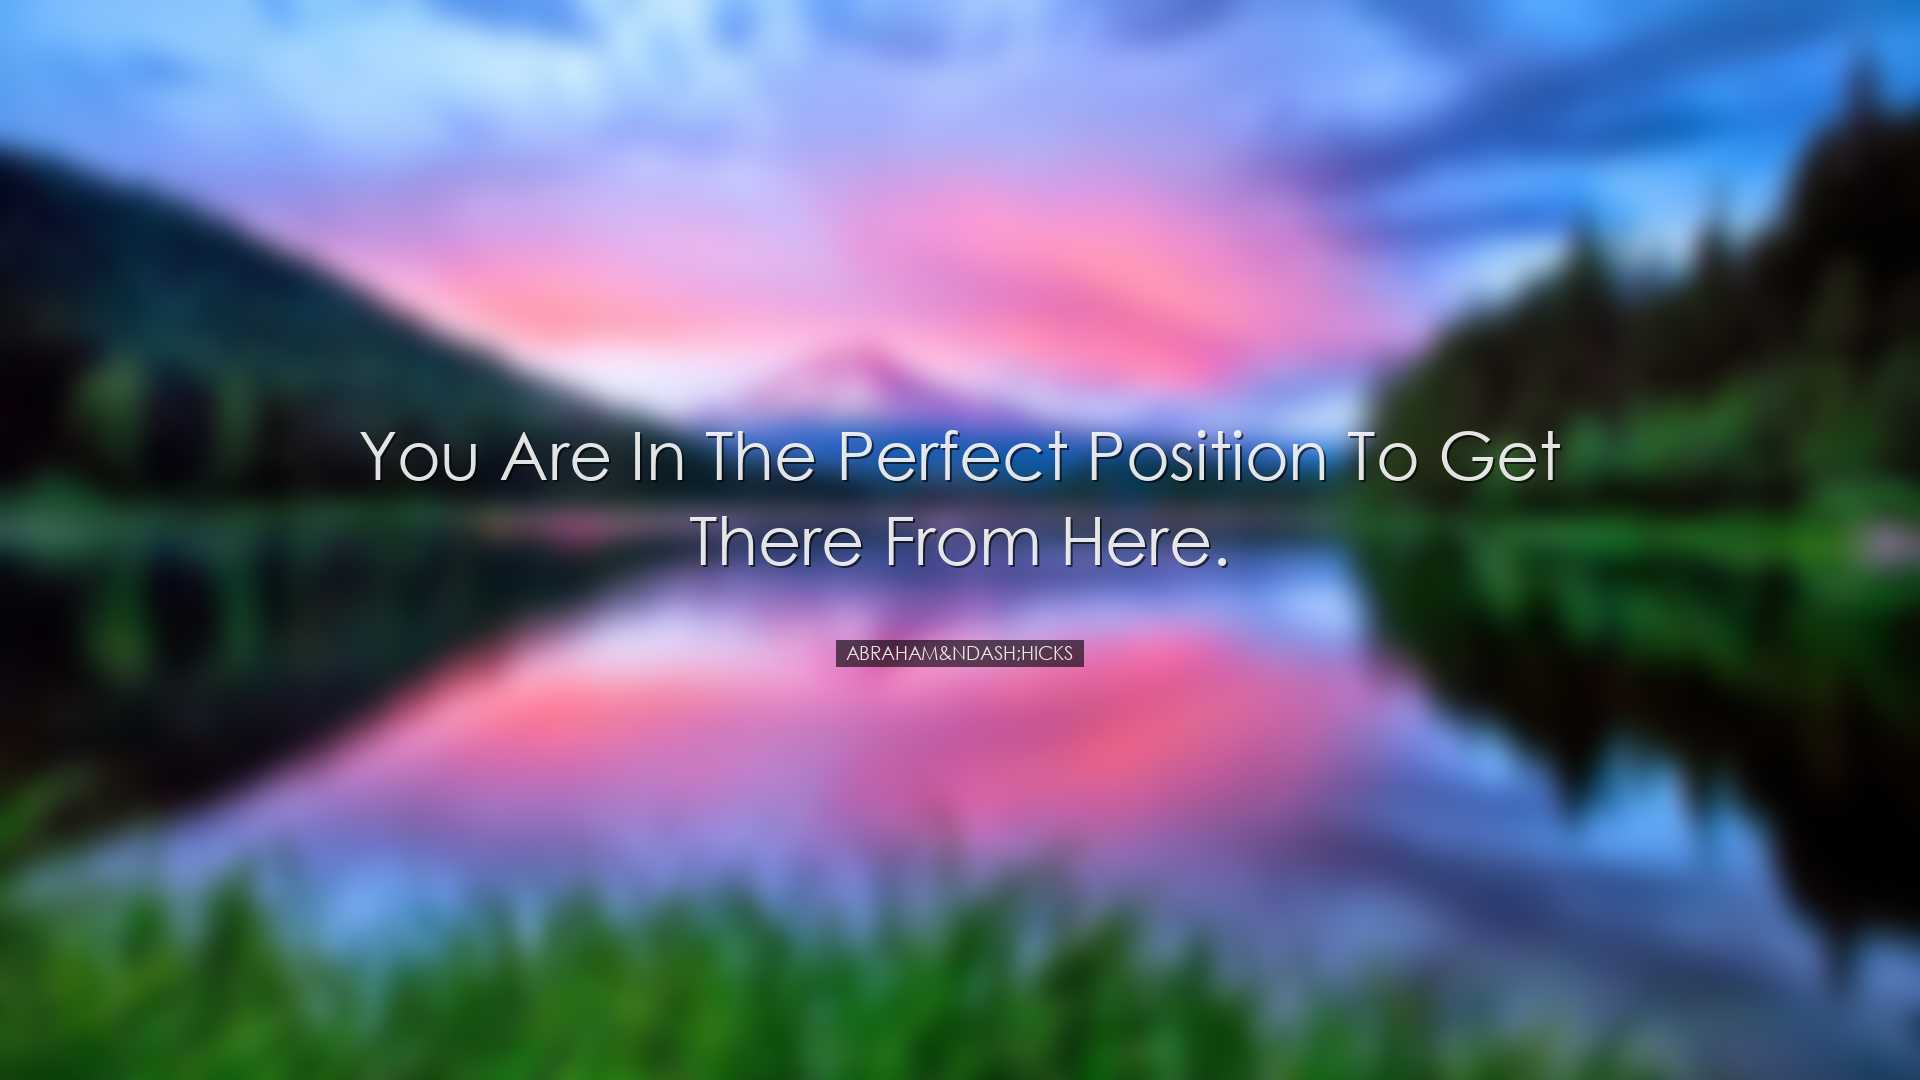 You are in the perfect position to get there from here. - Abraham&